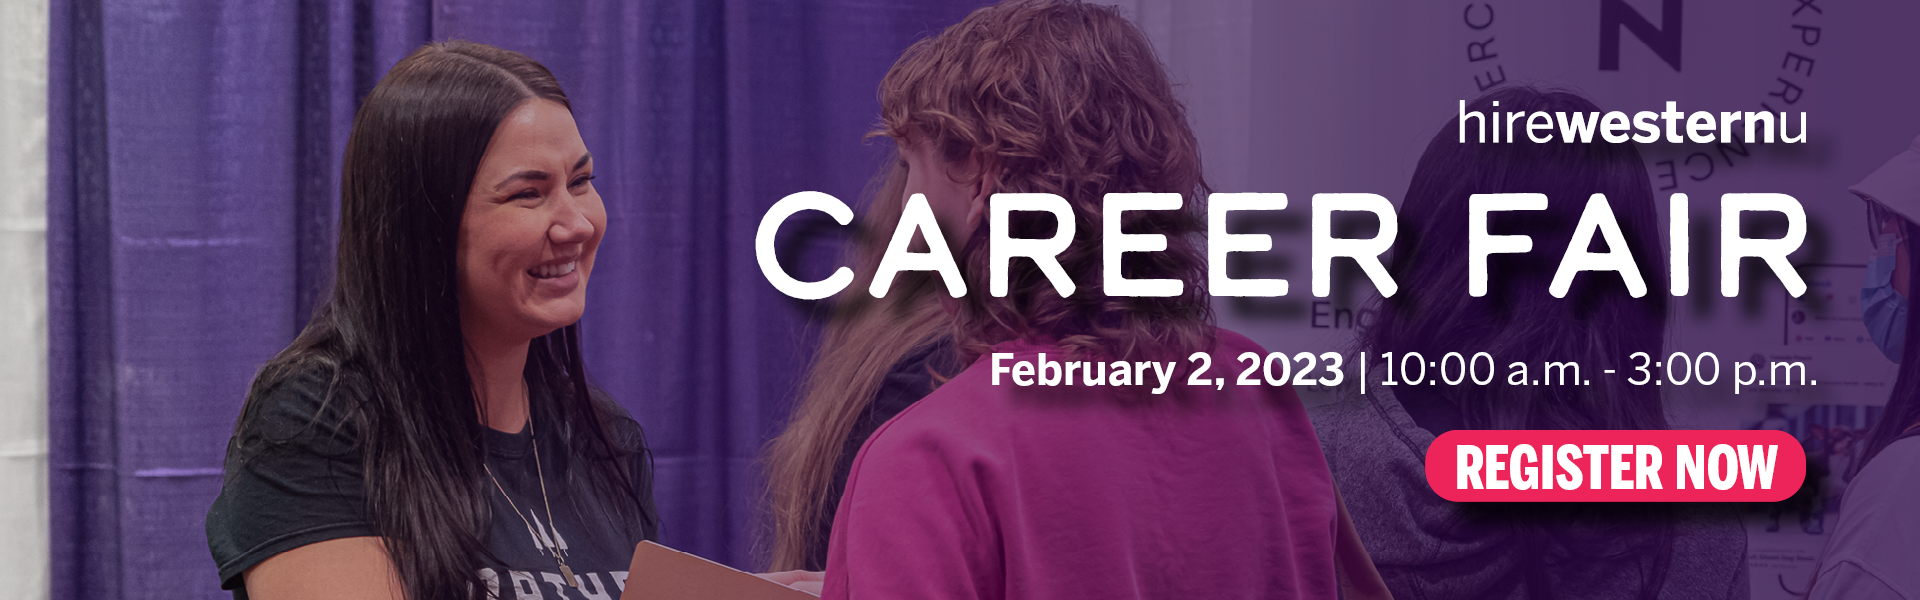 Recruiter and student speaking at previous Career Fair with purple overlay and white text reading hirewesternu Career Fair, February 2, 2023 from 10am - 3pm. Register now!